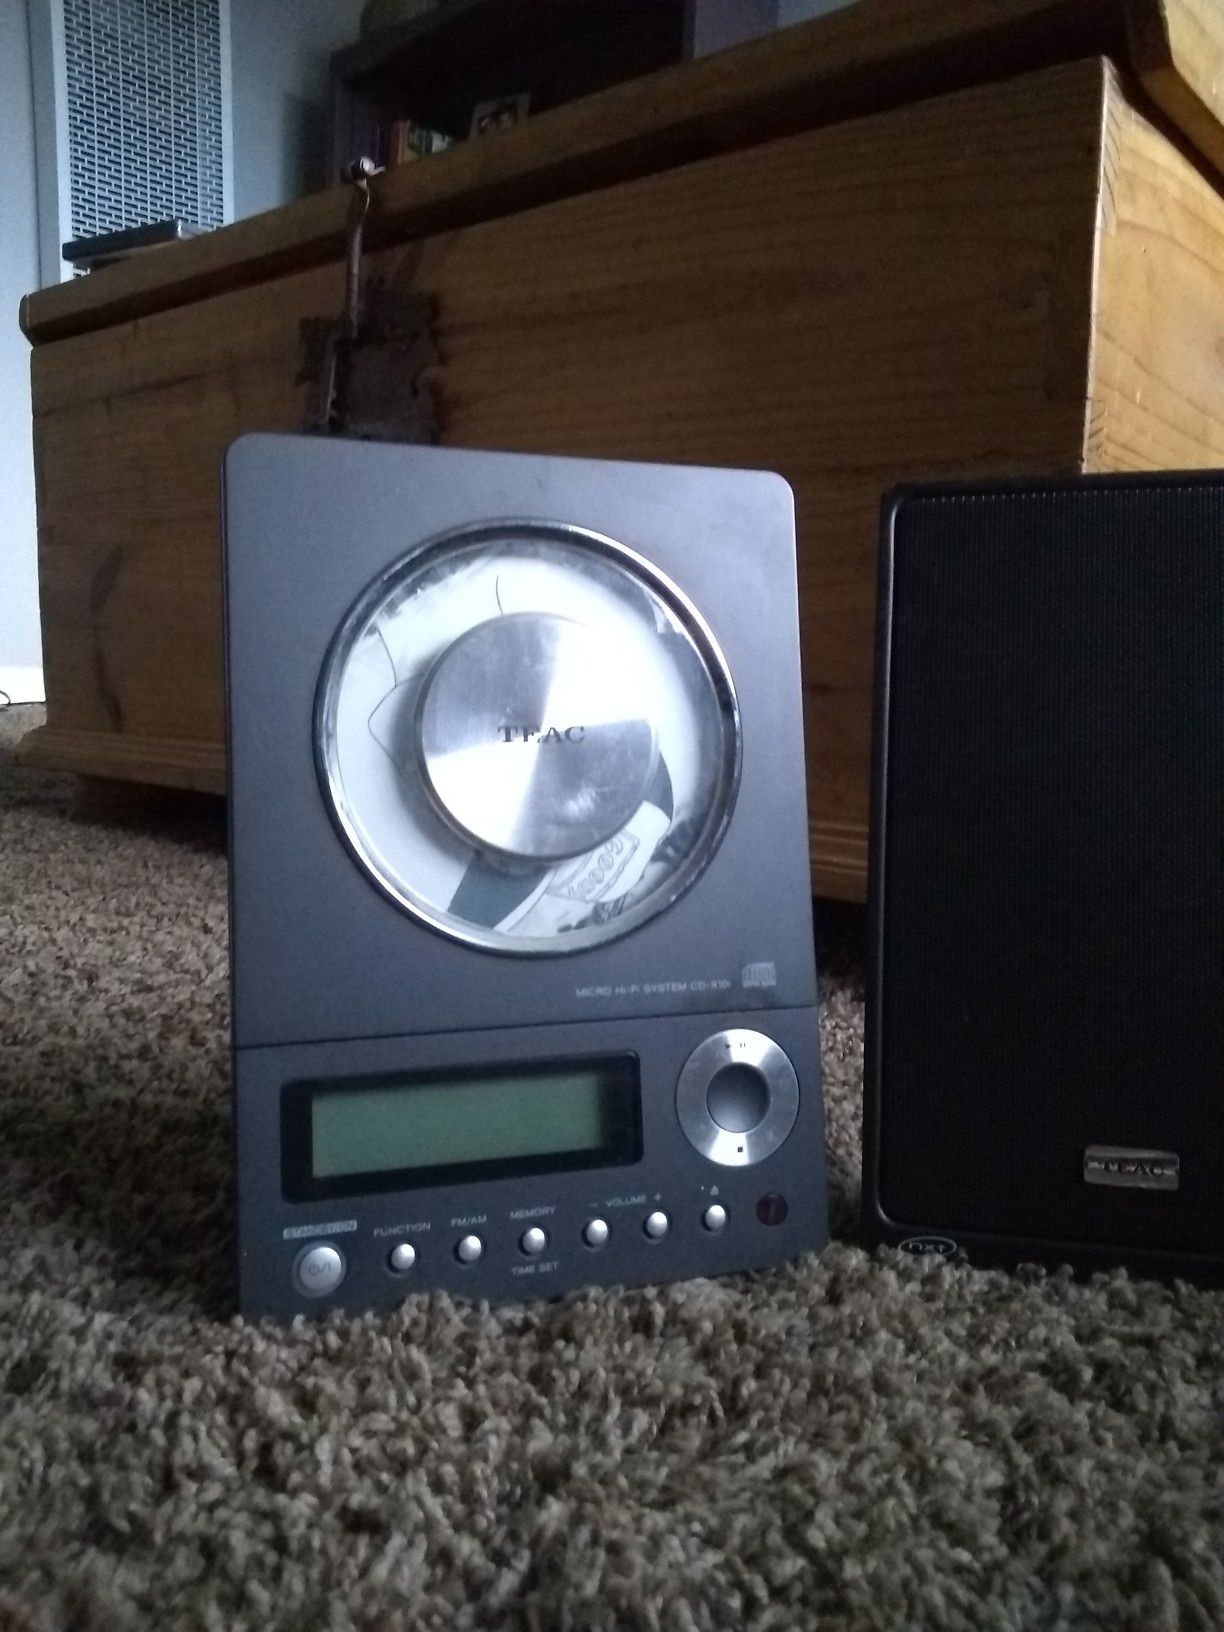 Teac home stereo system.